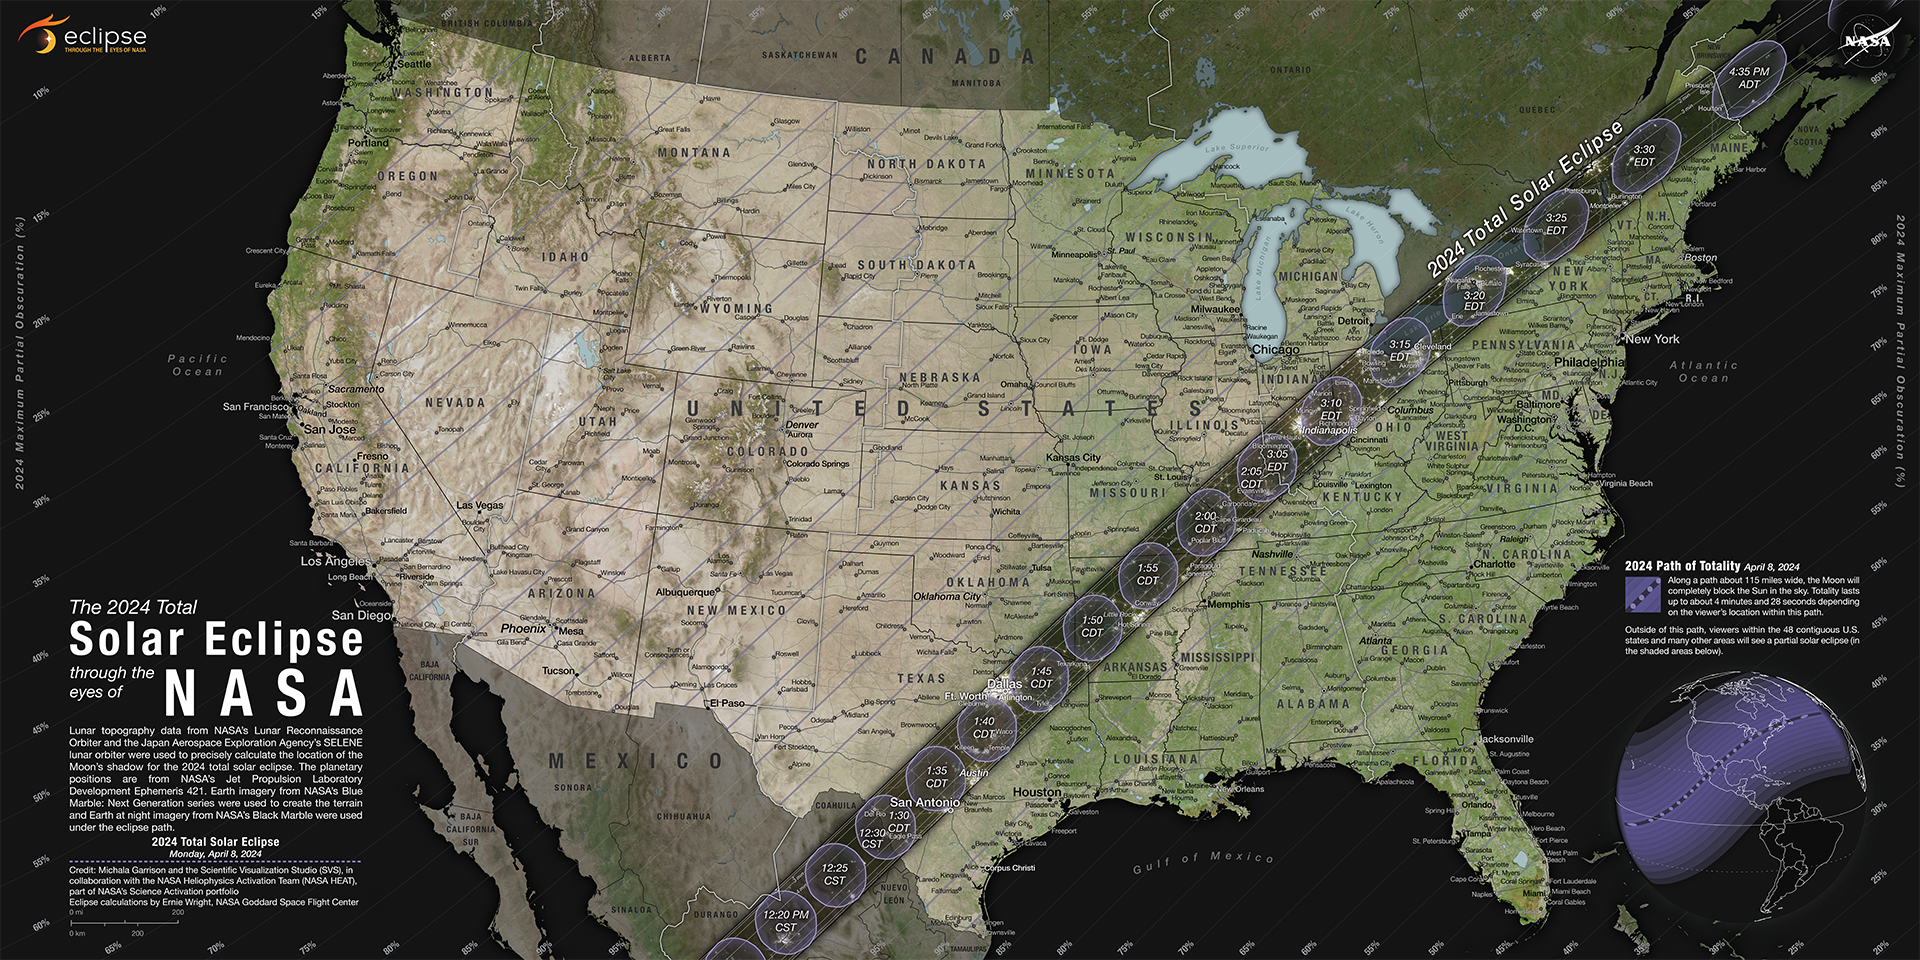 Solar eclipse 2024 How to see it in the UK & North America The Royal